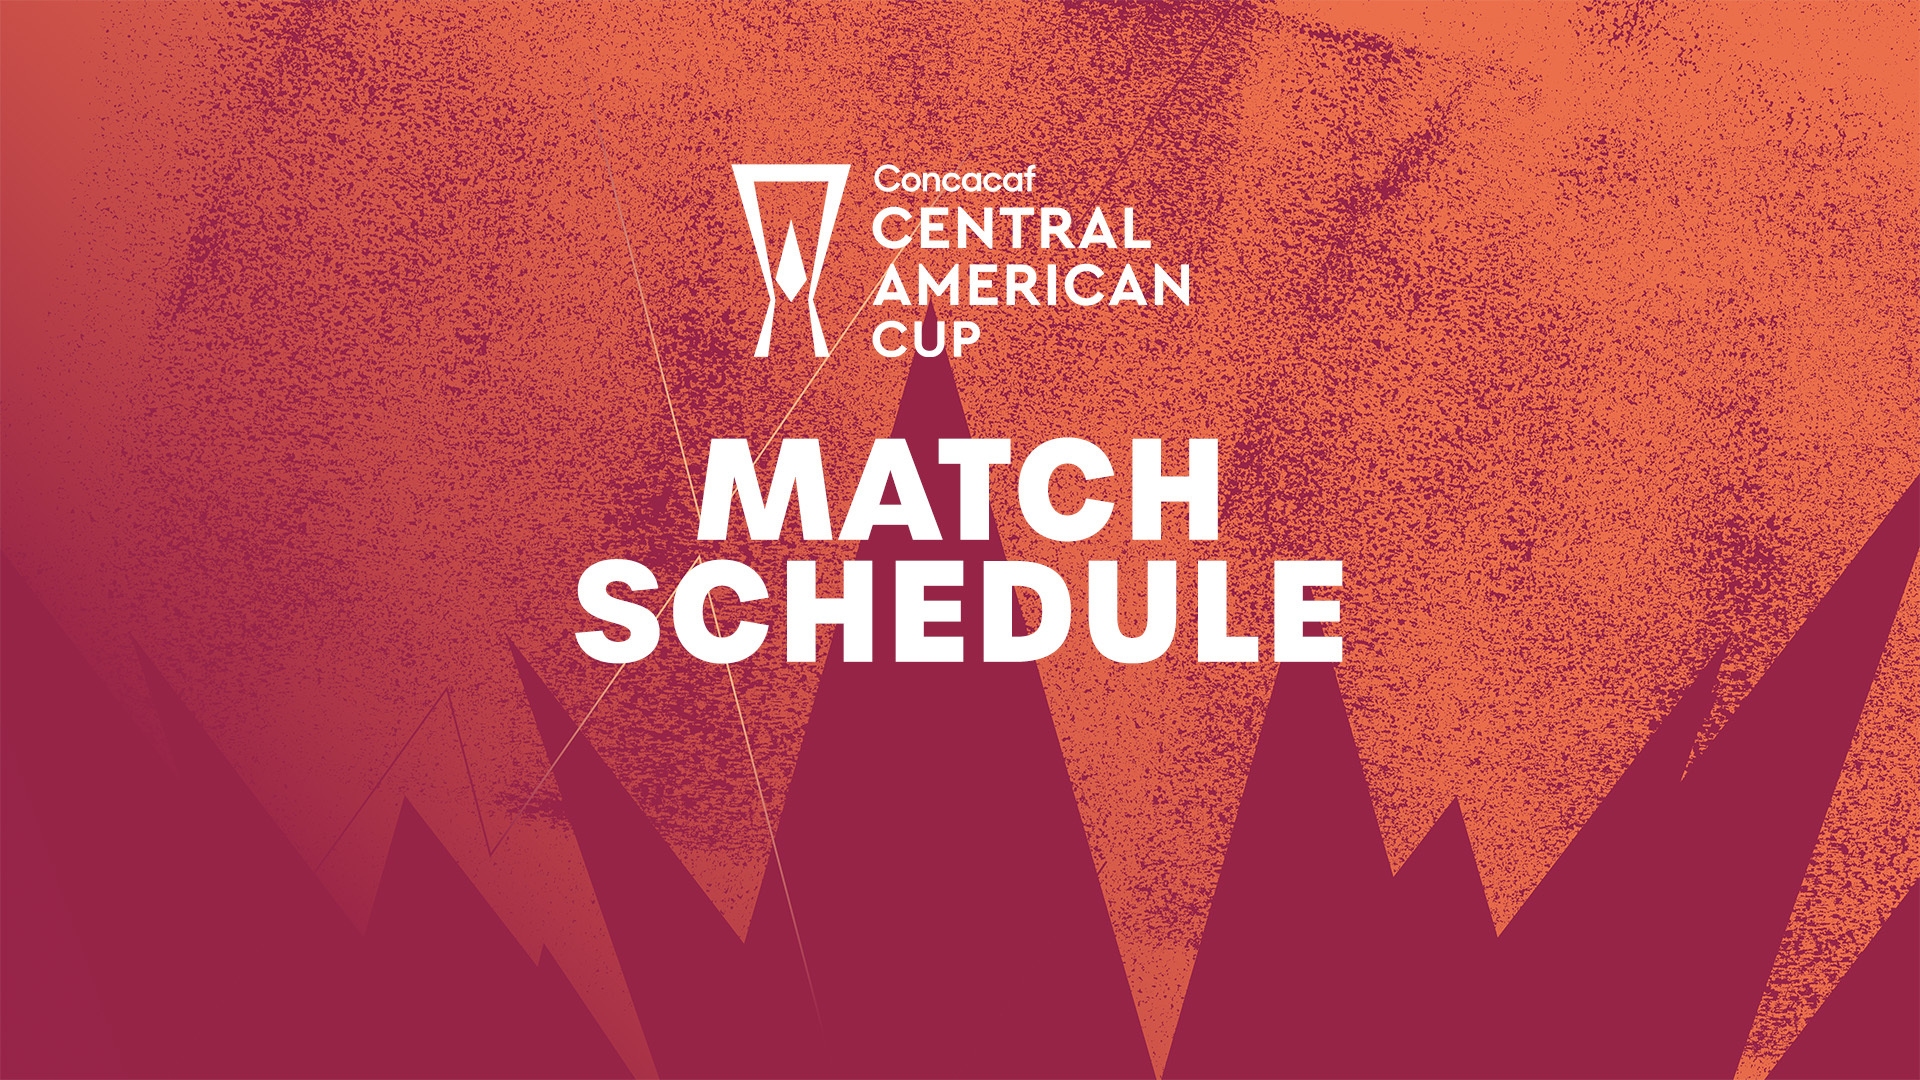 Schedule announced for 2023 Concacaf Central American Cup